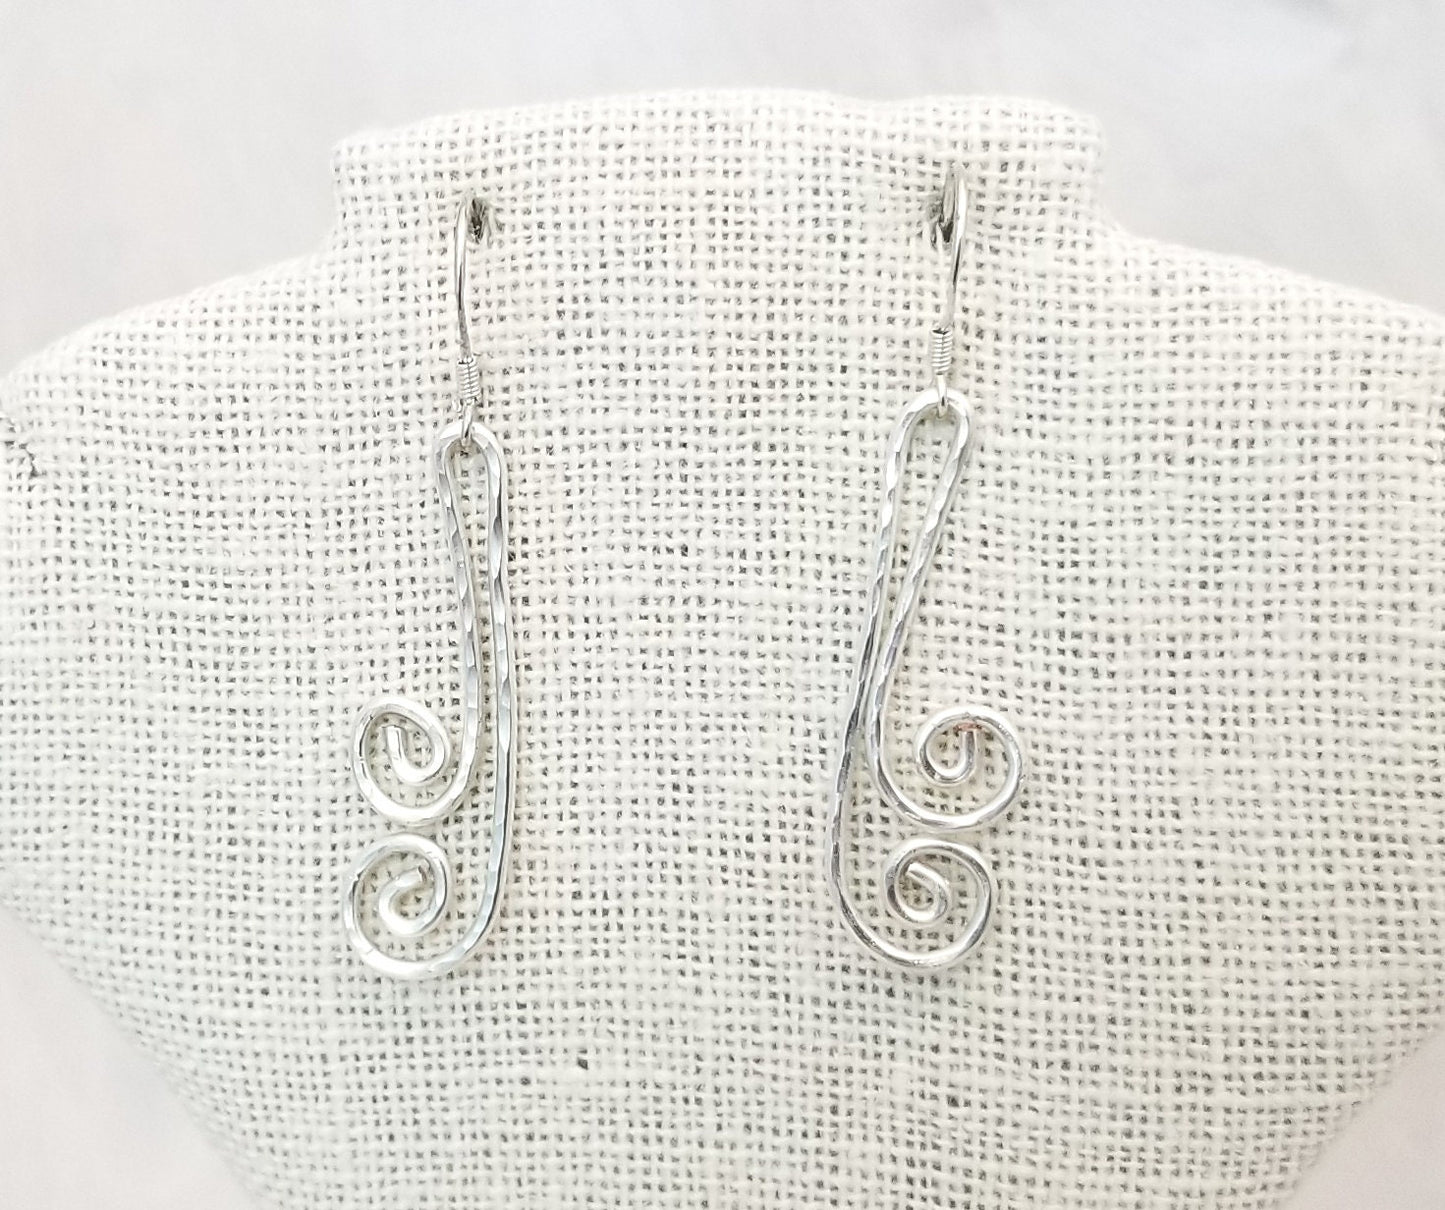 Hammered Spiral Wire Earrings, Medium Length, Art Deco, Modern, Simple, Wedding, Bridesmaid, Choice of Metals and Closure Types